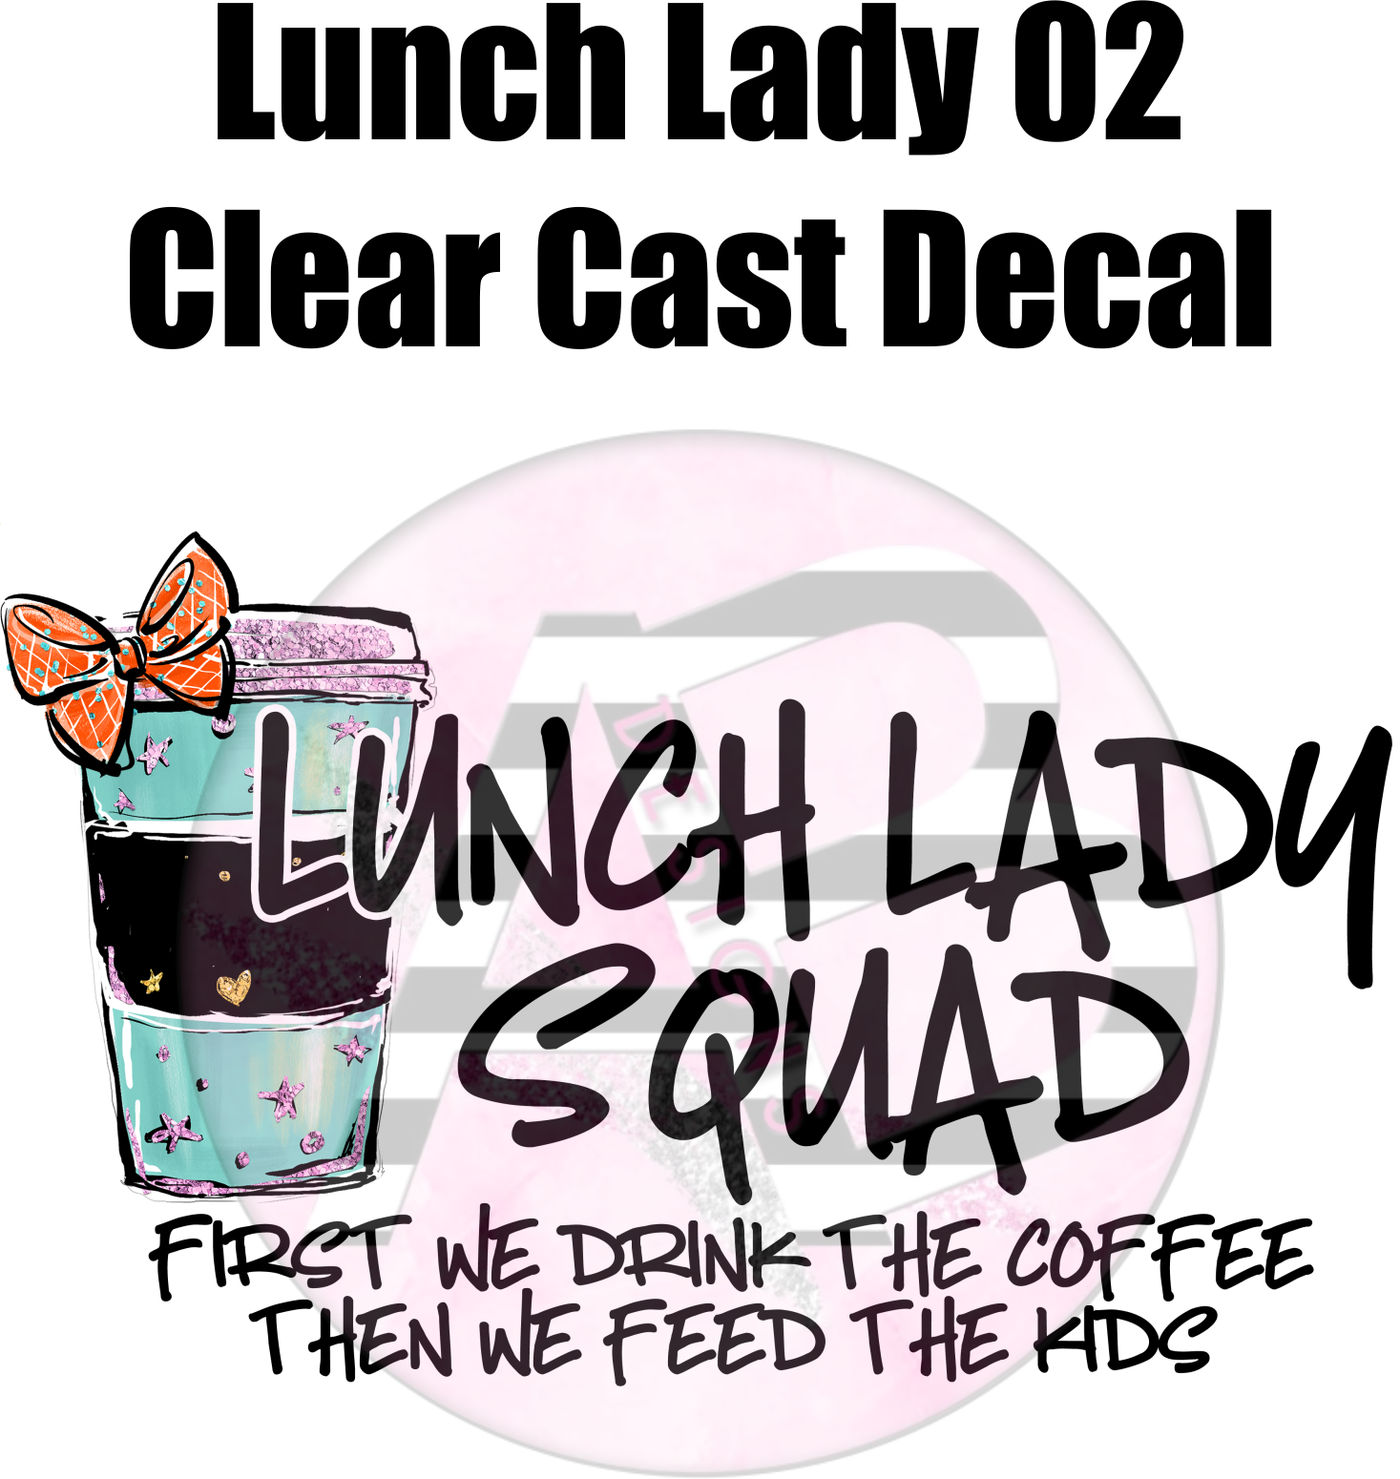 Lunch Lady 02 - Clear Cast Decal